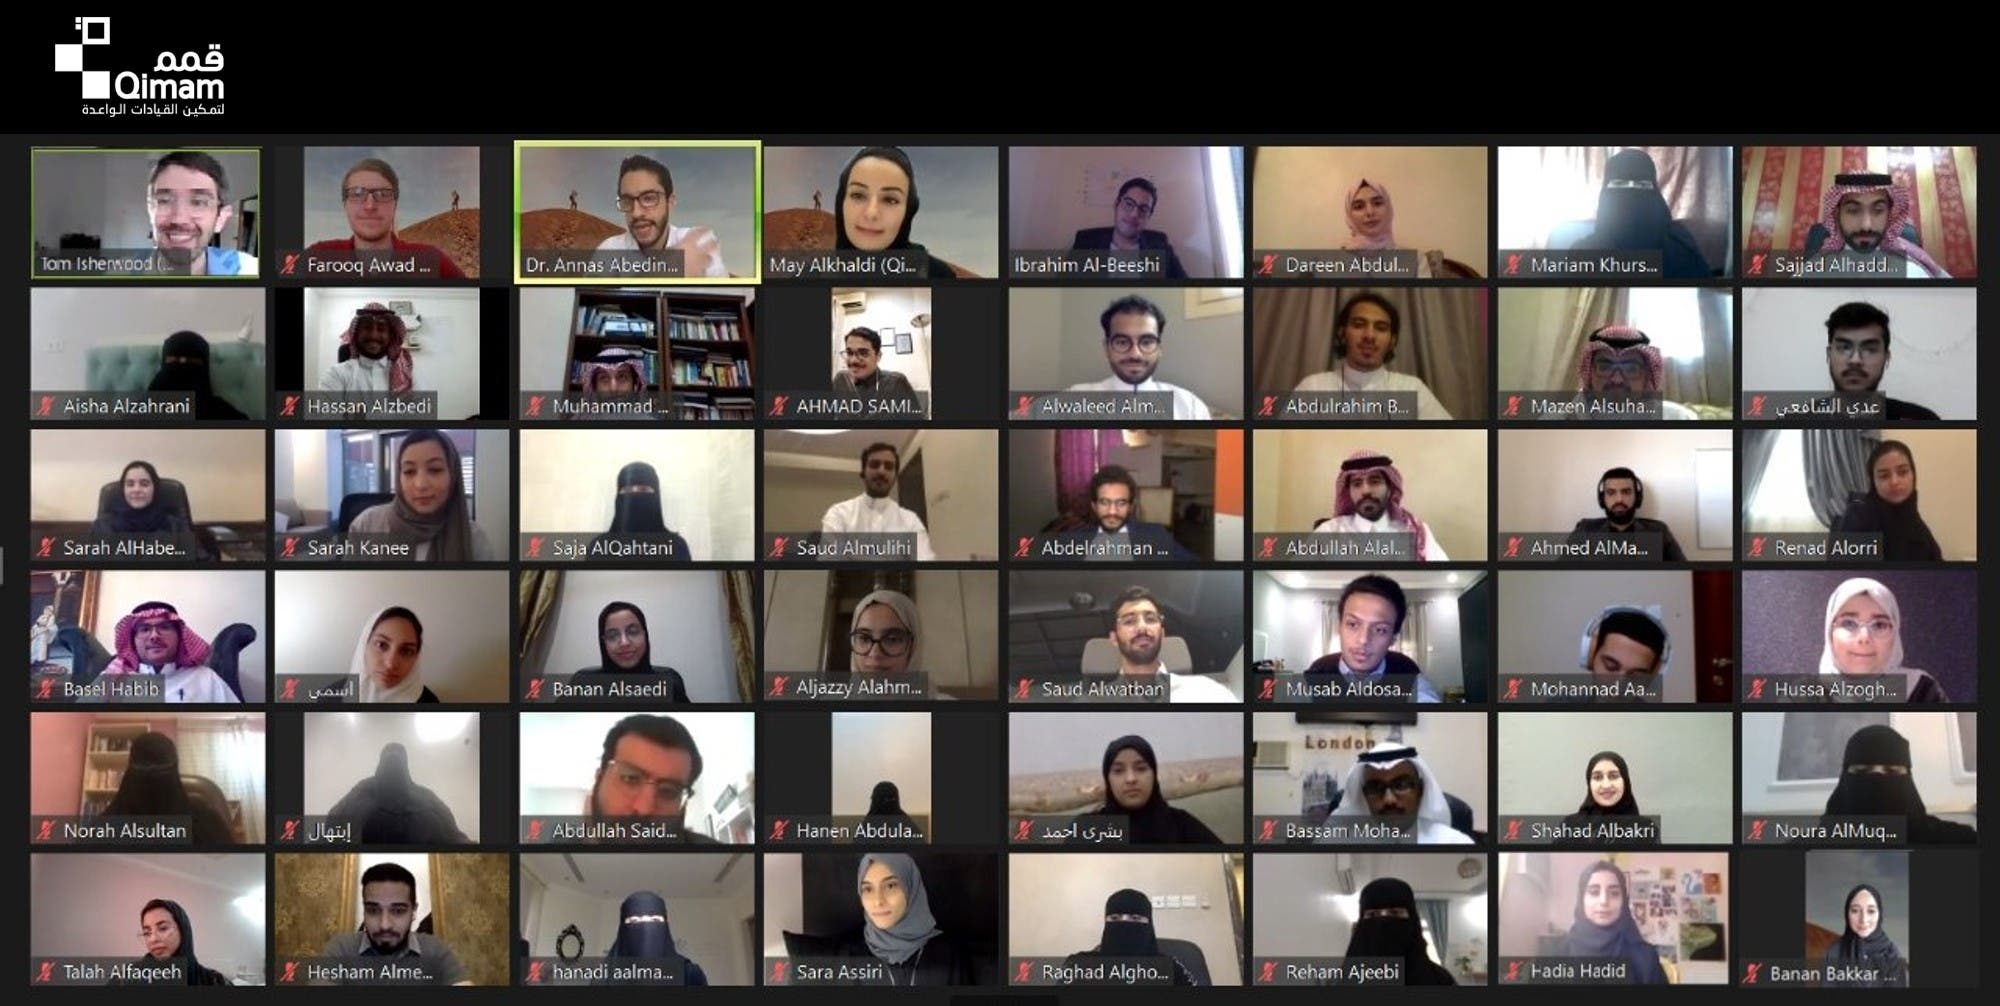 Students participate in a welcome session on Zoom for Qimam fellowship. (Supplied)